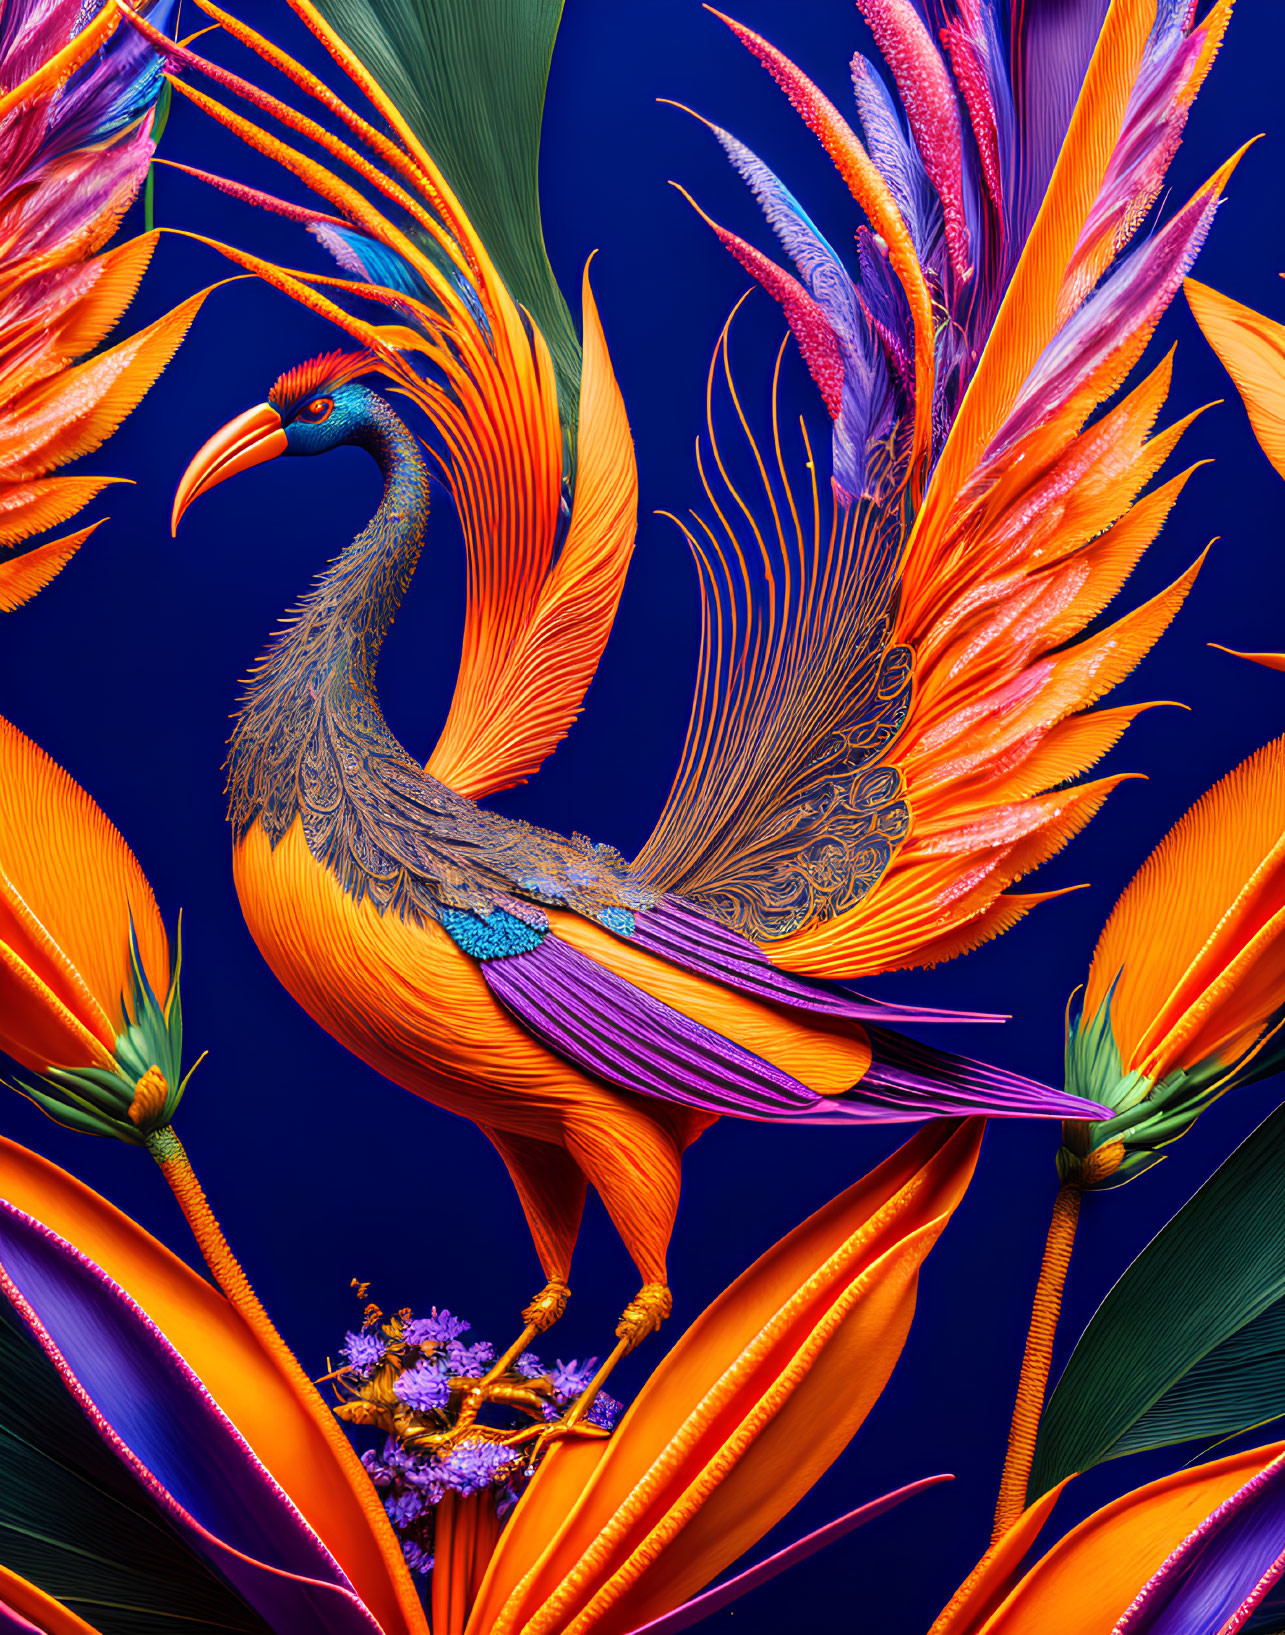 Colorful ornate bird digital art with detailed feathers on blue background